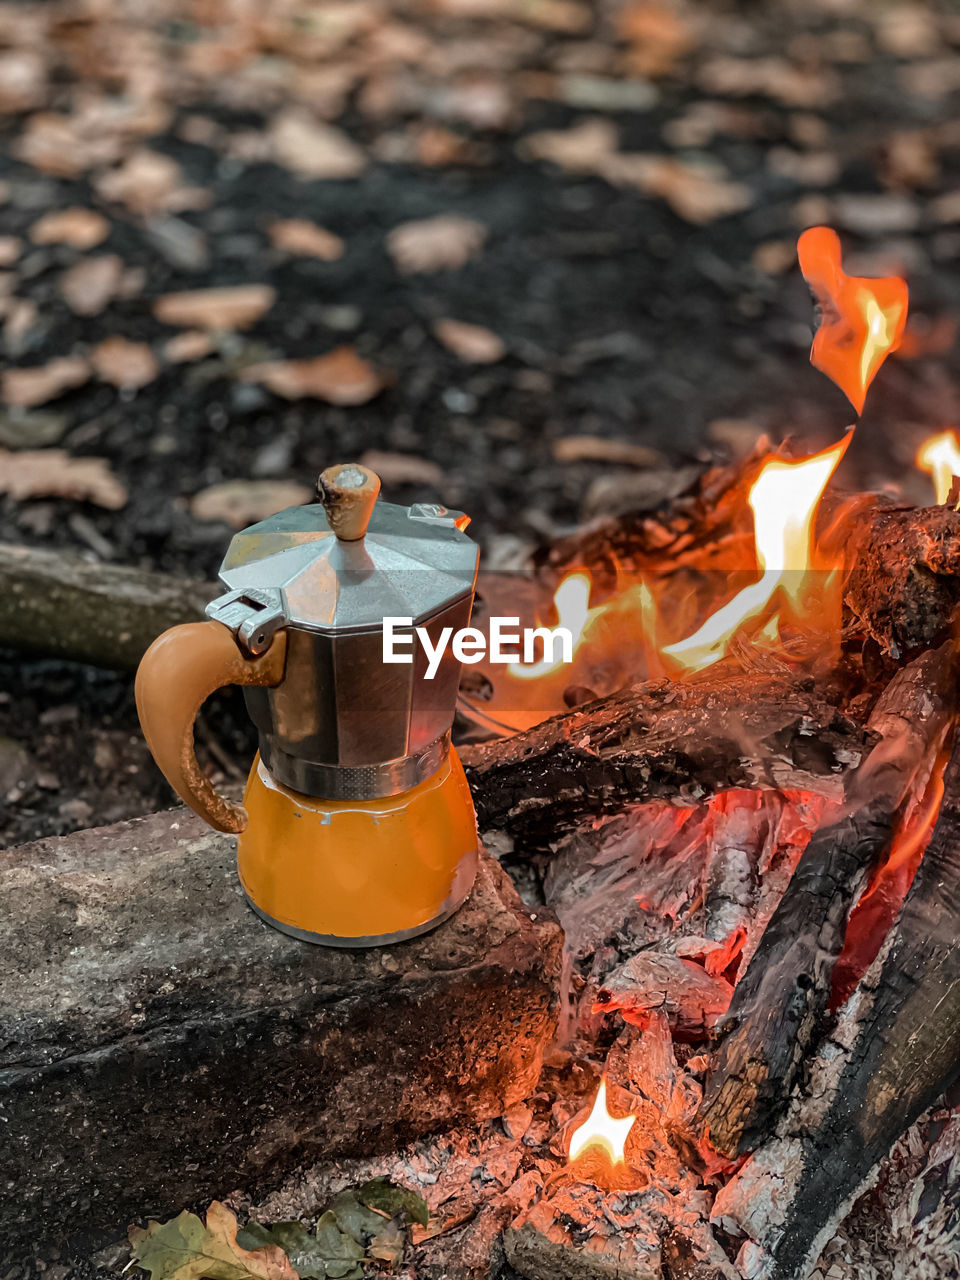 Small thing meters, fire, mokapot, coffee in forest.